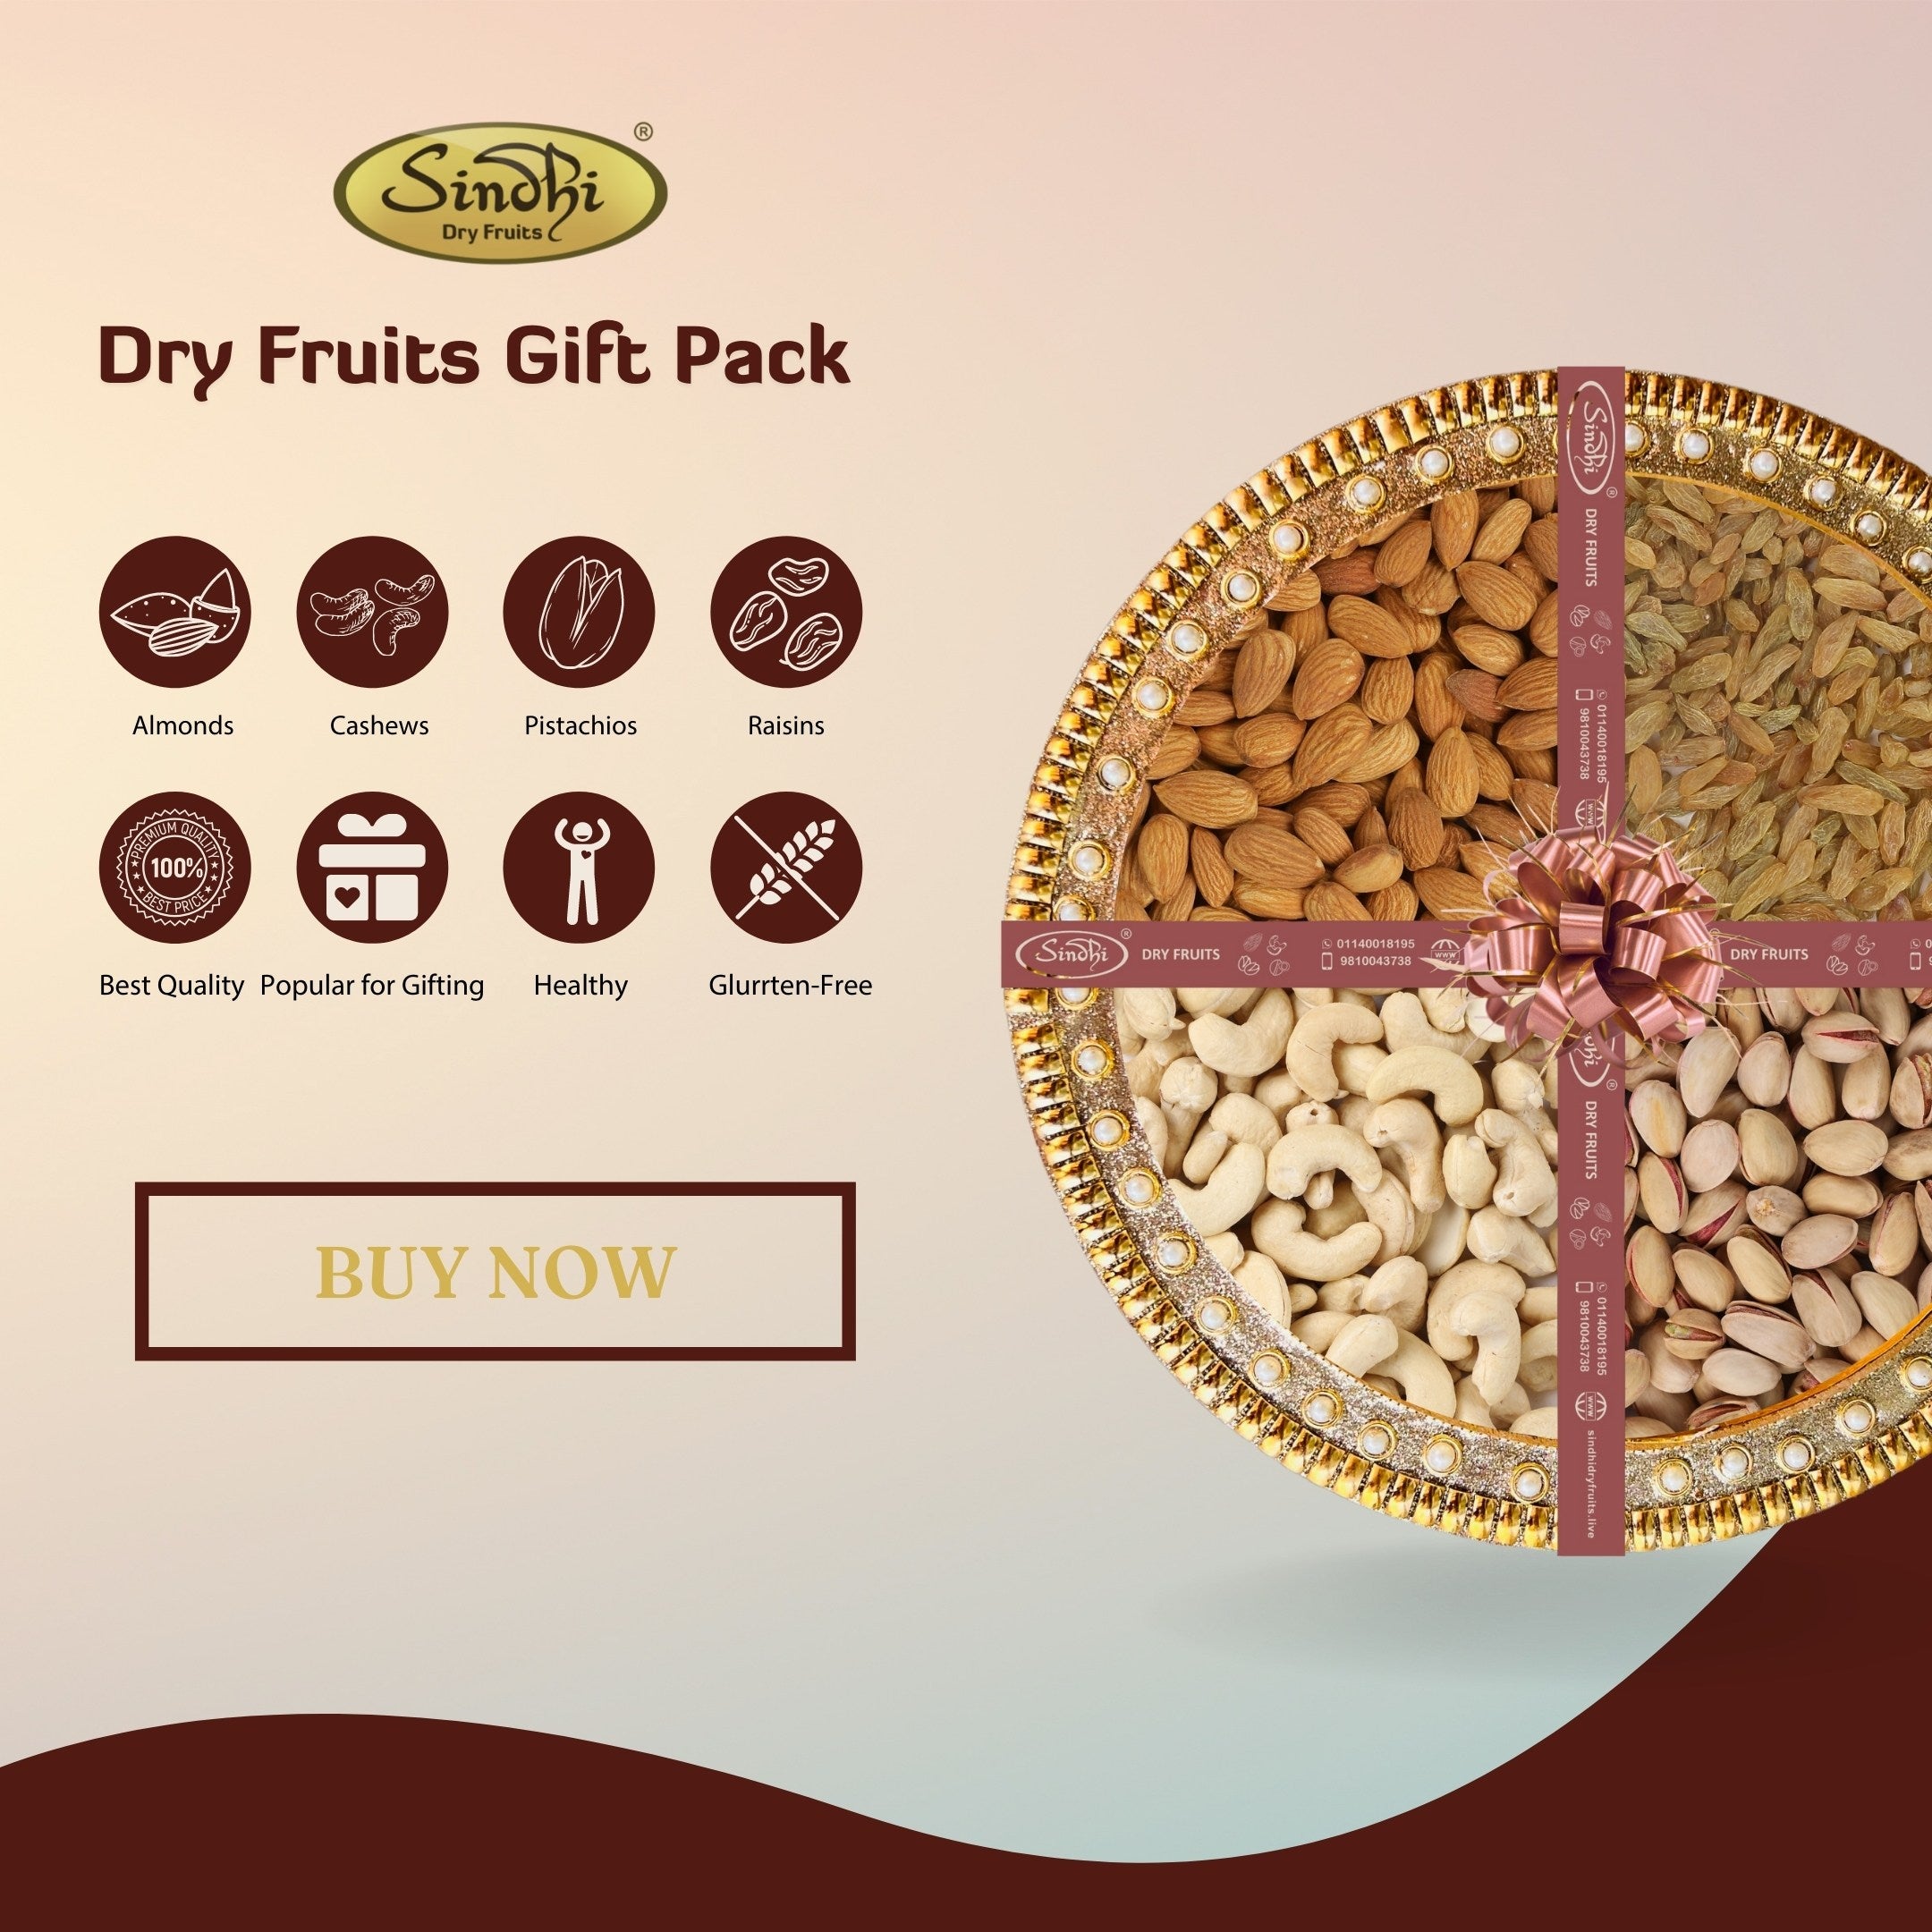 Gift Pack Containing Cashews, Almonds, Pistachios and Raisins - Sindhi Dry Fruits